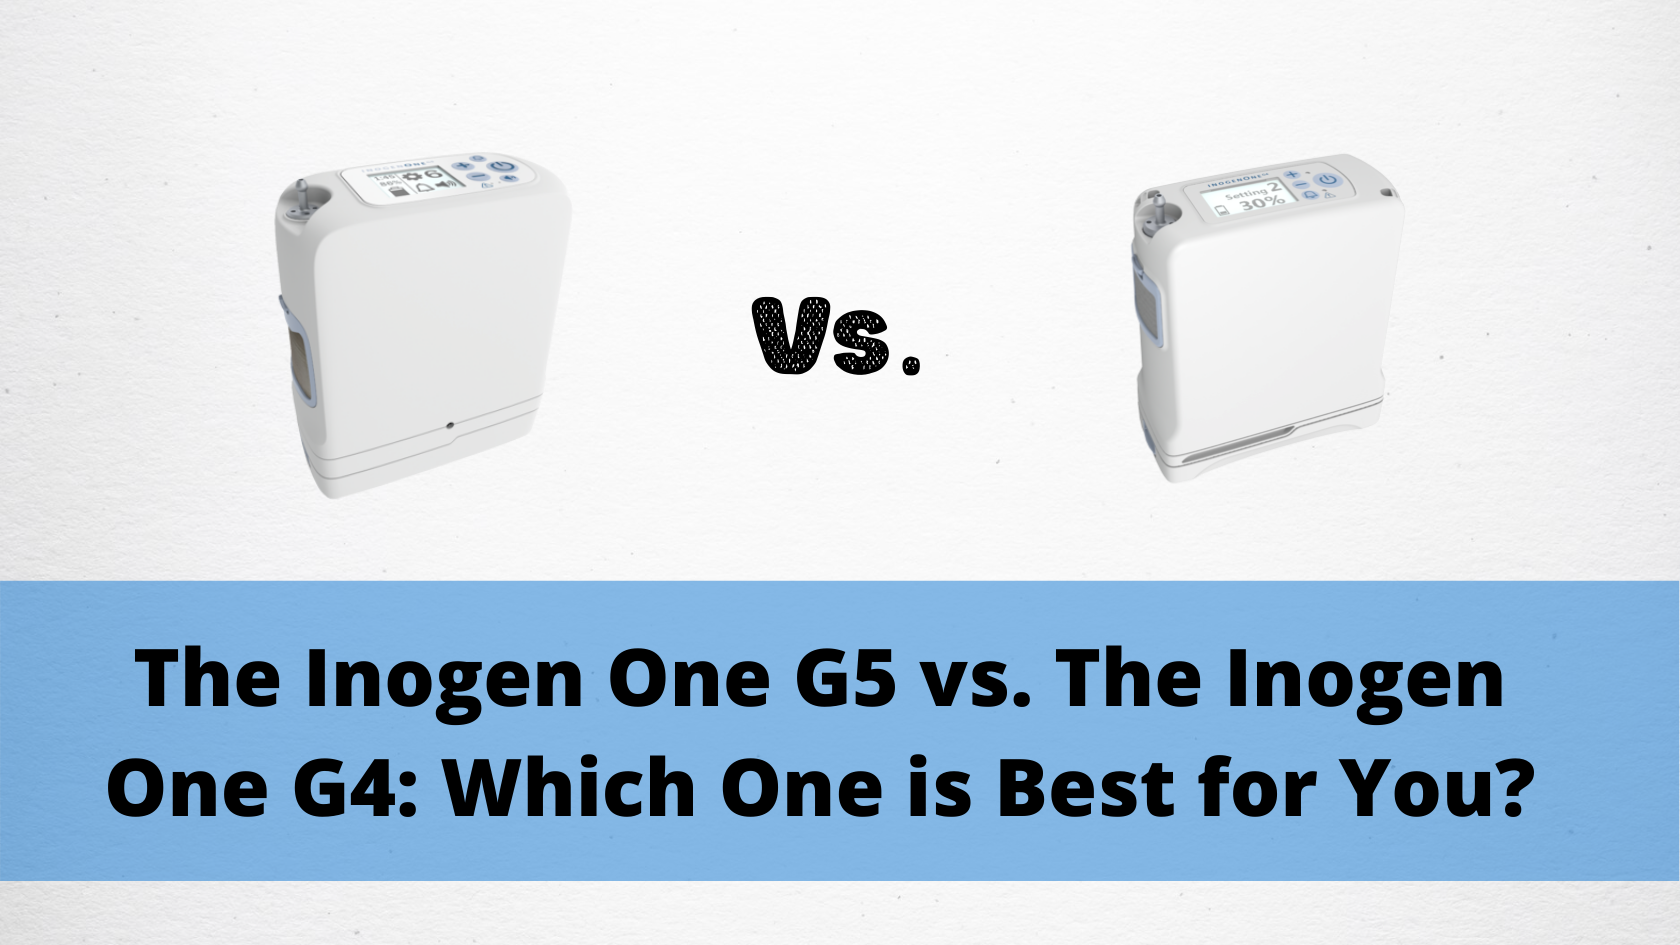 The Inogen One G5 vs. The Inogen One G4: Which One is Best for You?